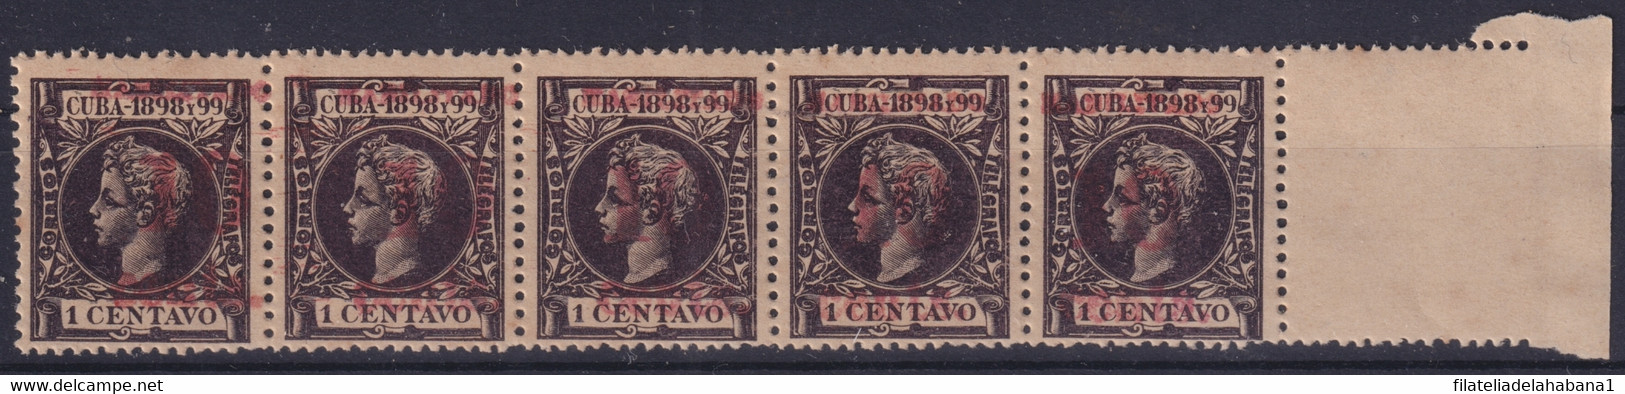 1899-486 CUBA 1899 10c S. 1c US OCCUPATION 4th ISSUE COMPLETE TRIP PHILATELIC FORGERY. - Neufs